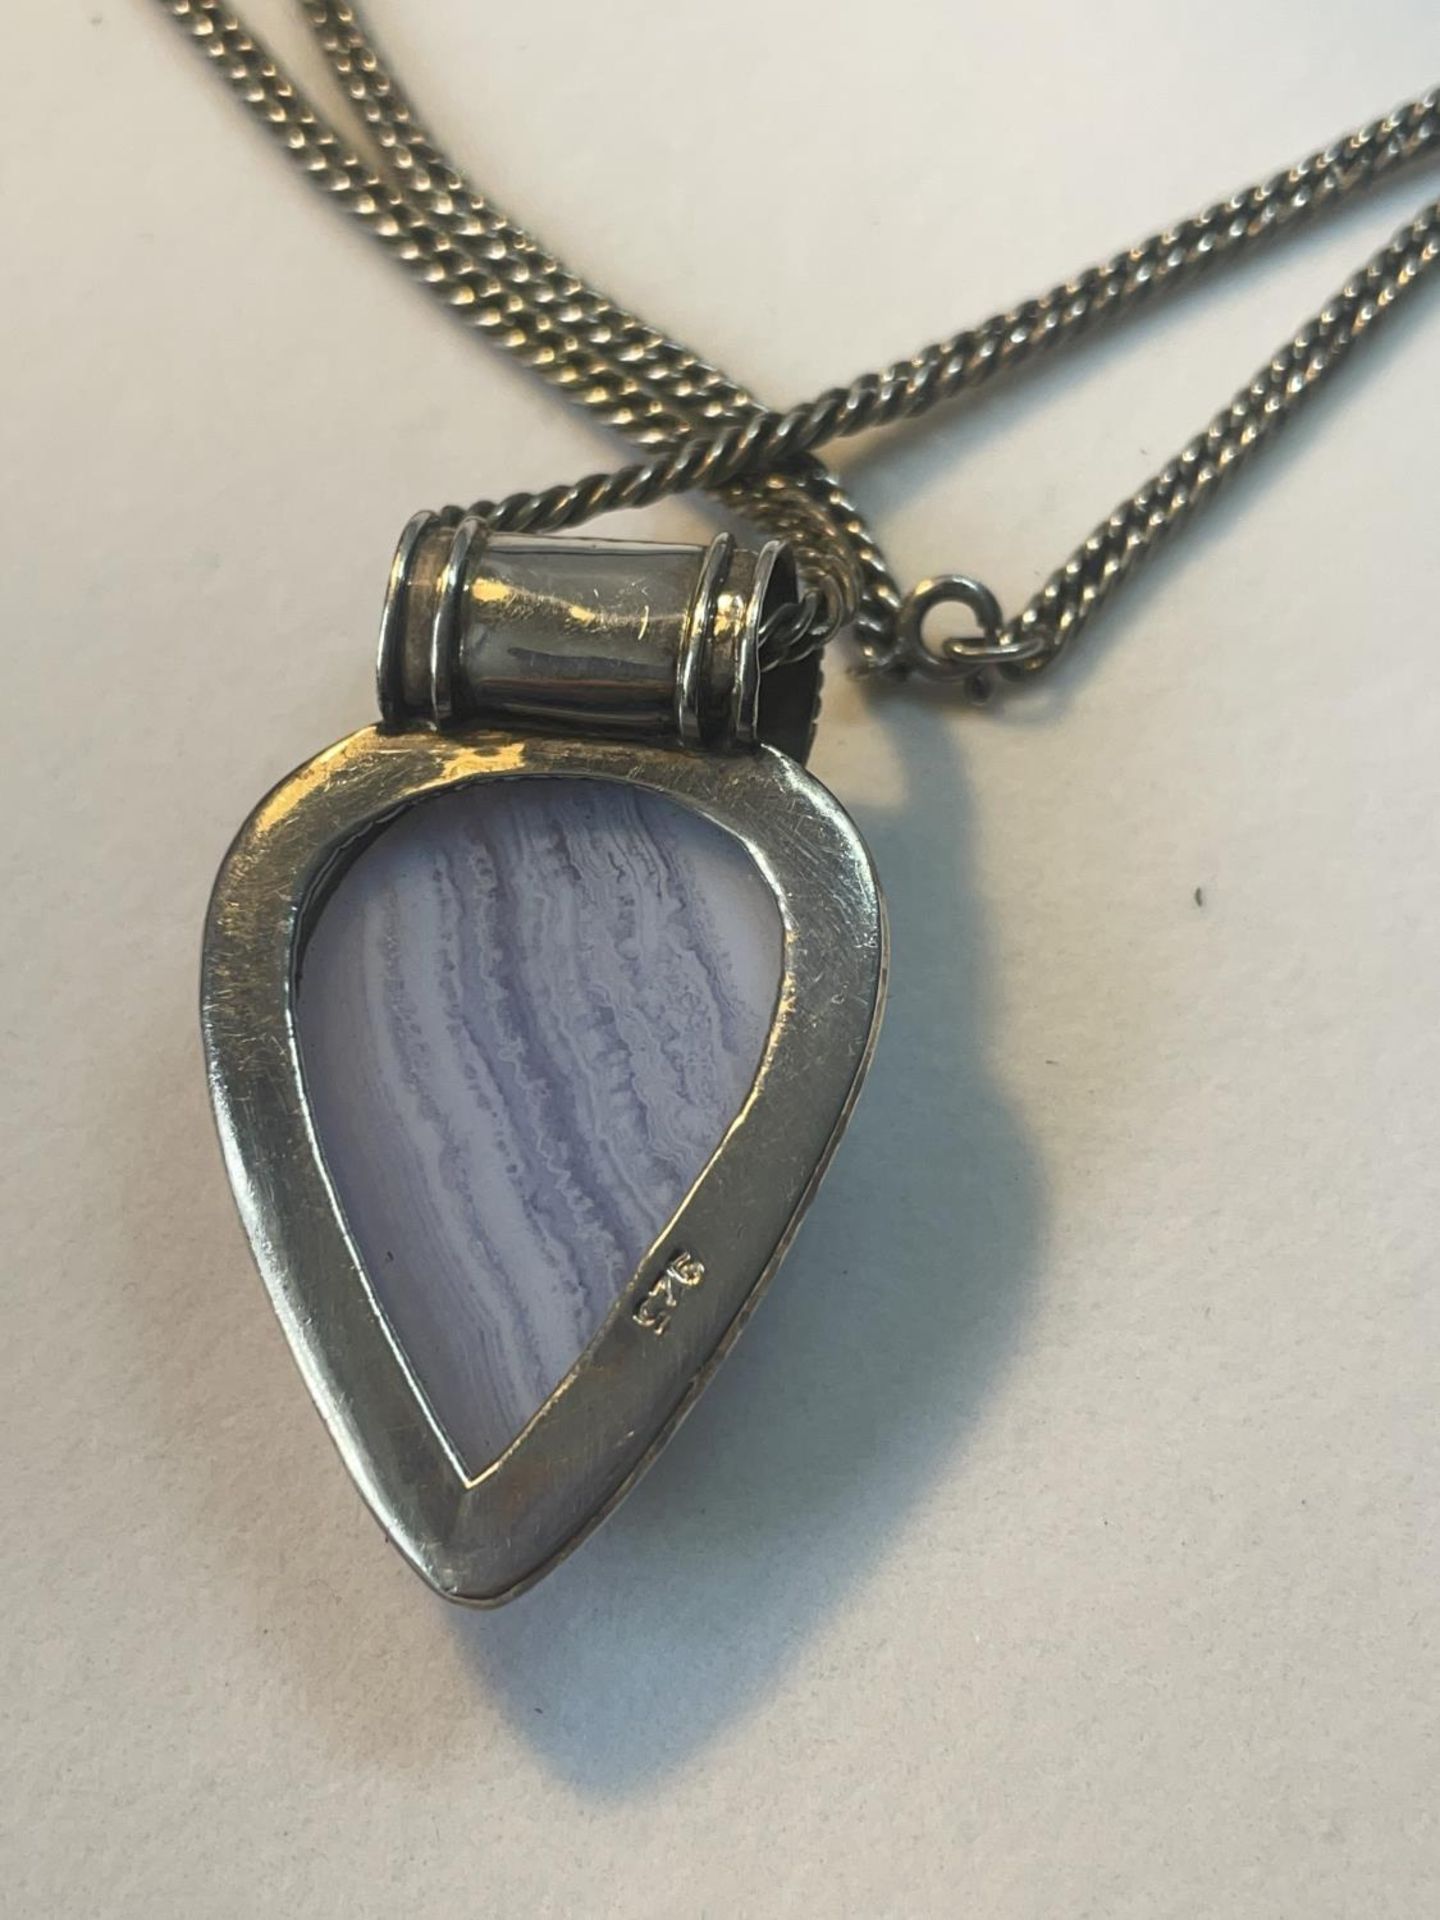 A MARKED SILVER NECKLACE WITH AN ORNATE FRAMED BLUE STONE PENDANT - Image 3 of 4